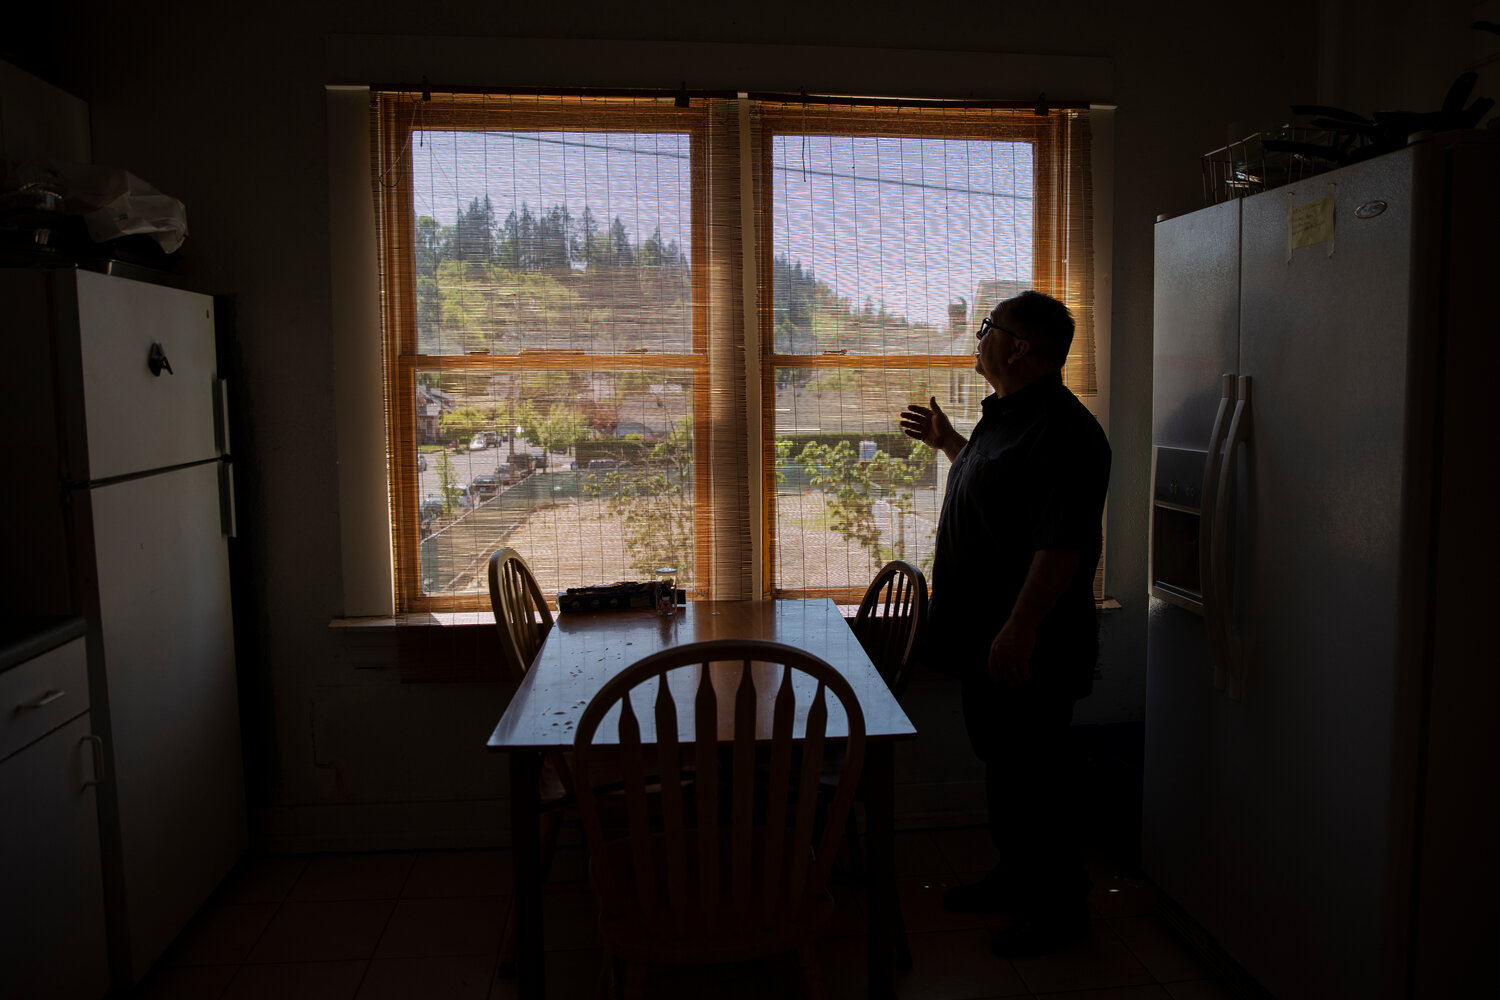 Mike Cross, Director, Pastor, & Housing Coordinator for Free on the Outside, shares about one of the common kitchen areas available for use for residents at The Carriage House in Oregon City, Ore., on Thursday, May 11, 2023. (Photo by Moriah Ratner for InvestigateWest)